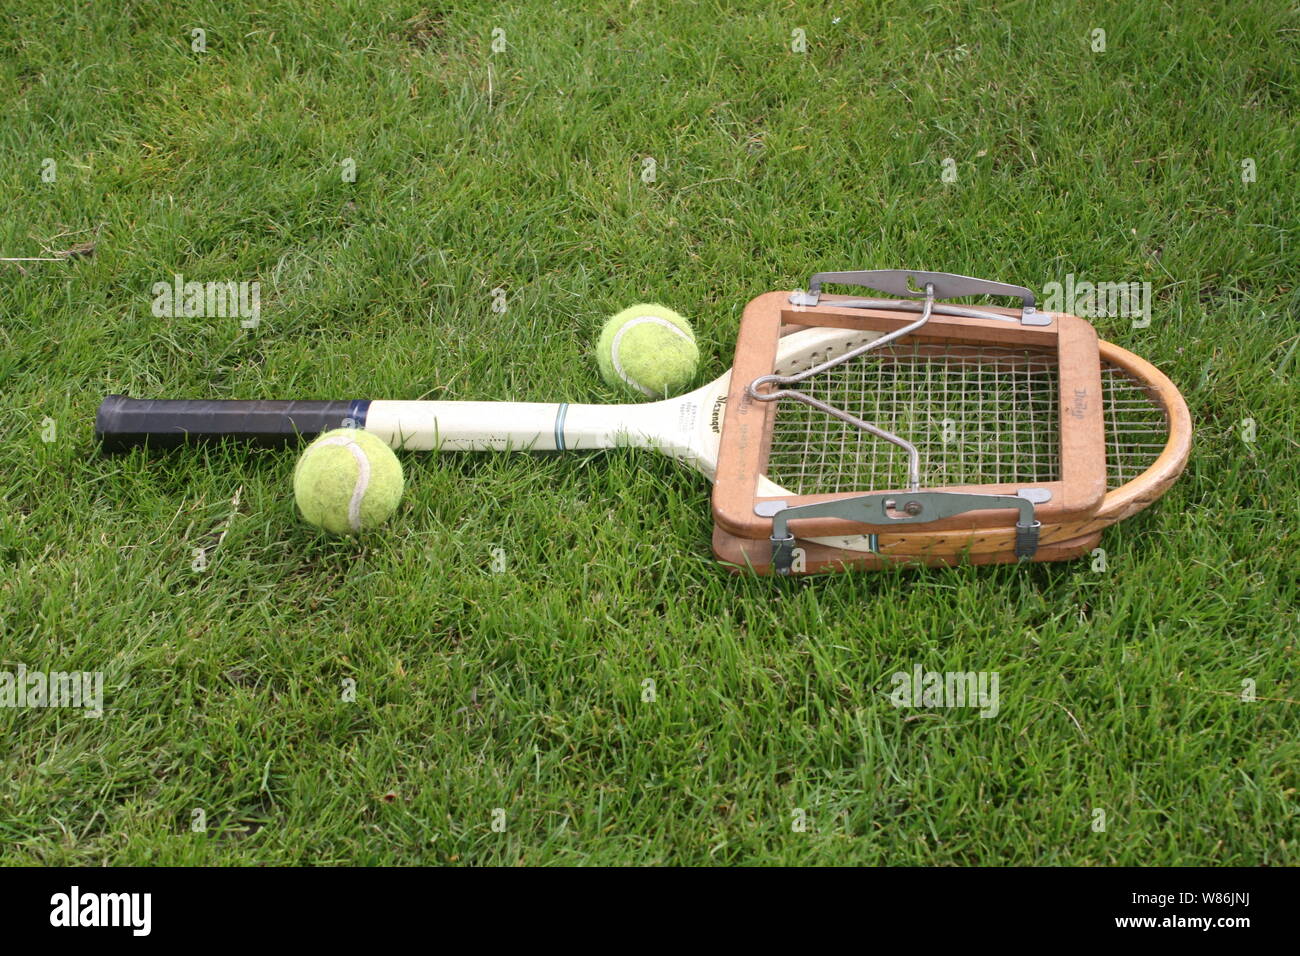 Vintage tennis racket and tennis balls on the lawn Stock Photo